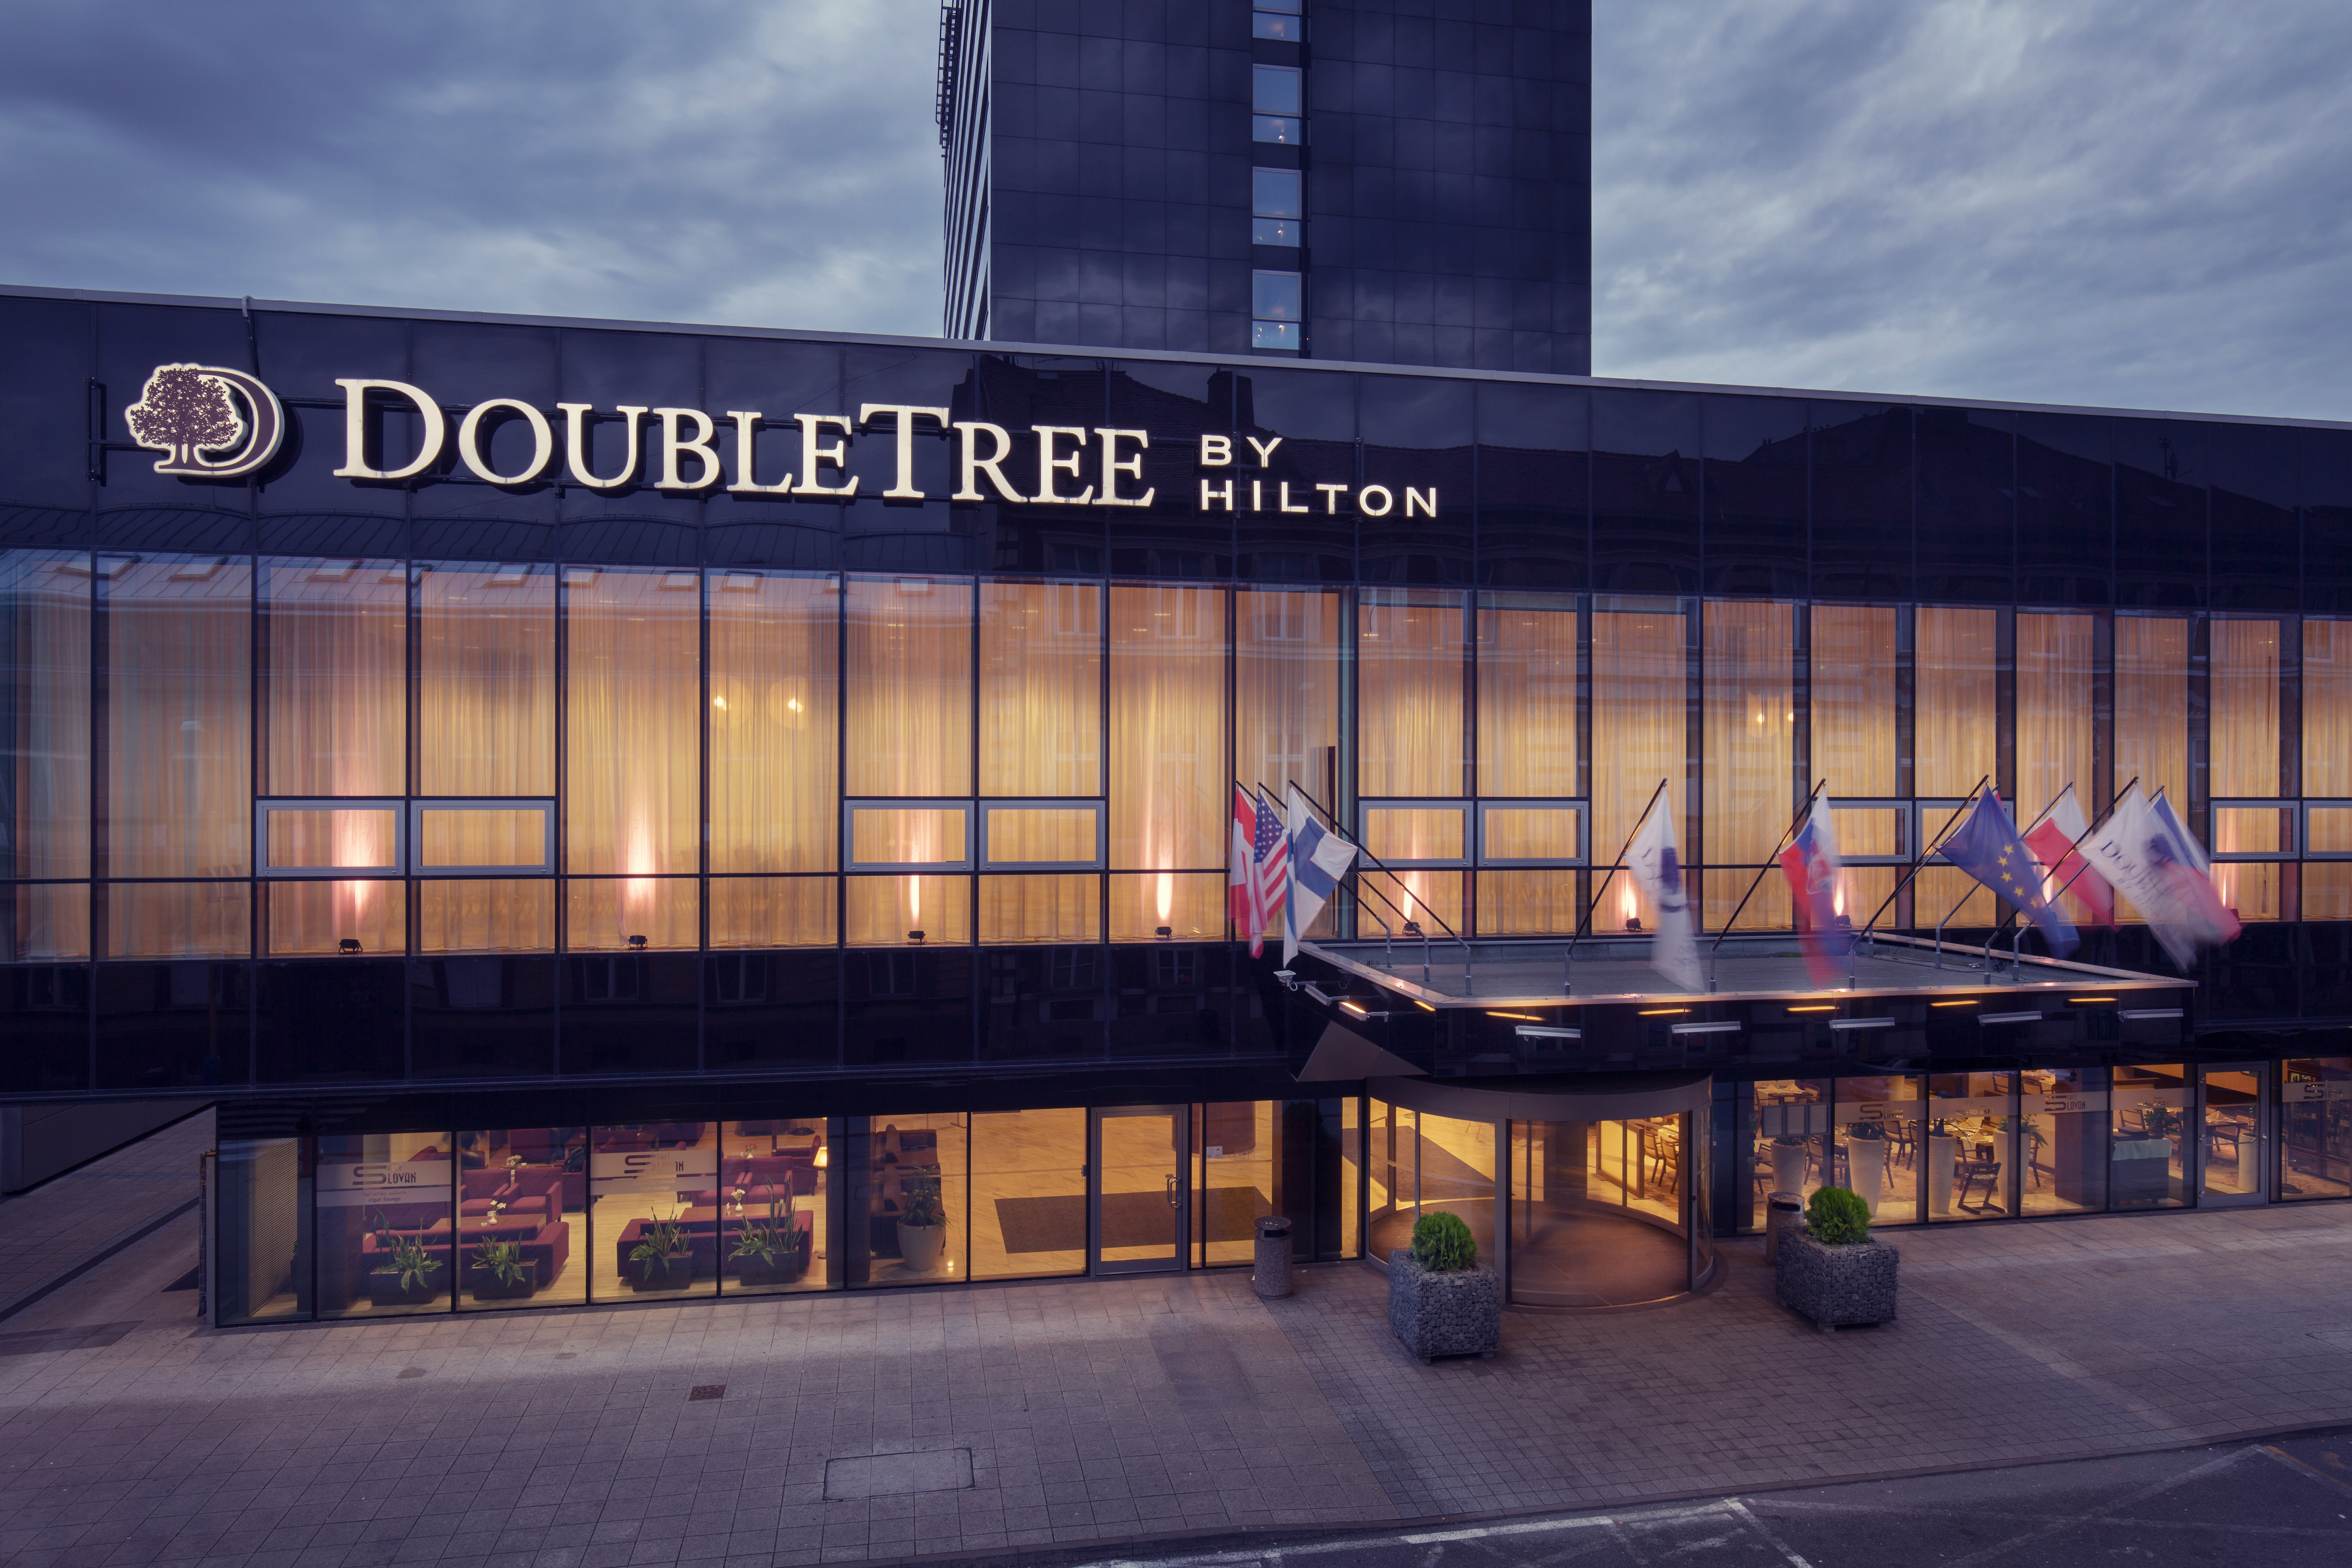 DoubleTree Hotel Exterior in the Evening